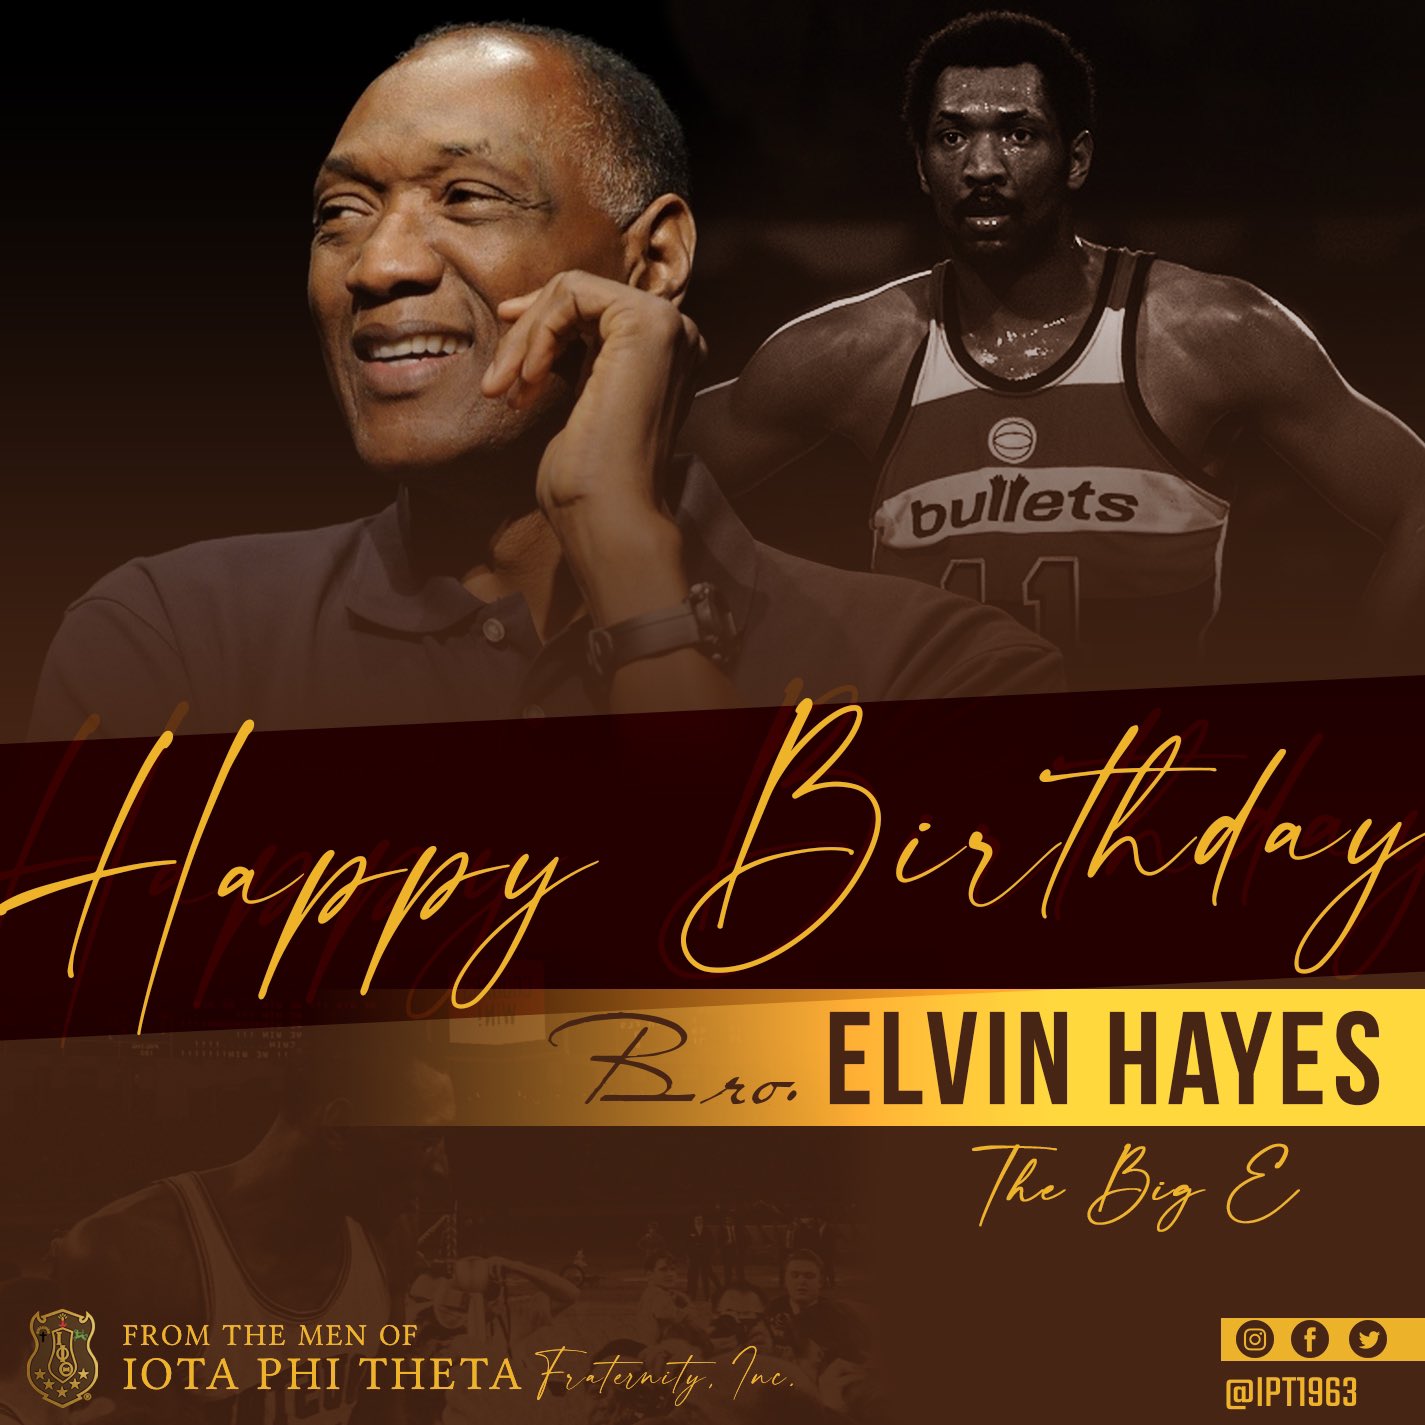 Happy belated birthday to  Naismith Memorial Basketball Hall of Fame member Bro. Elvin Hayes, The Big E. 